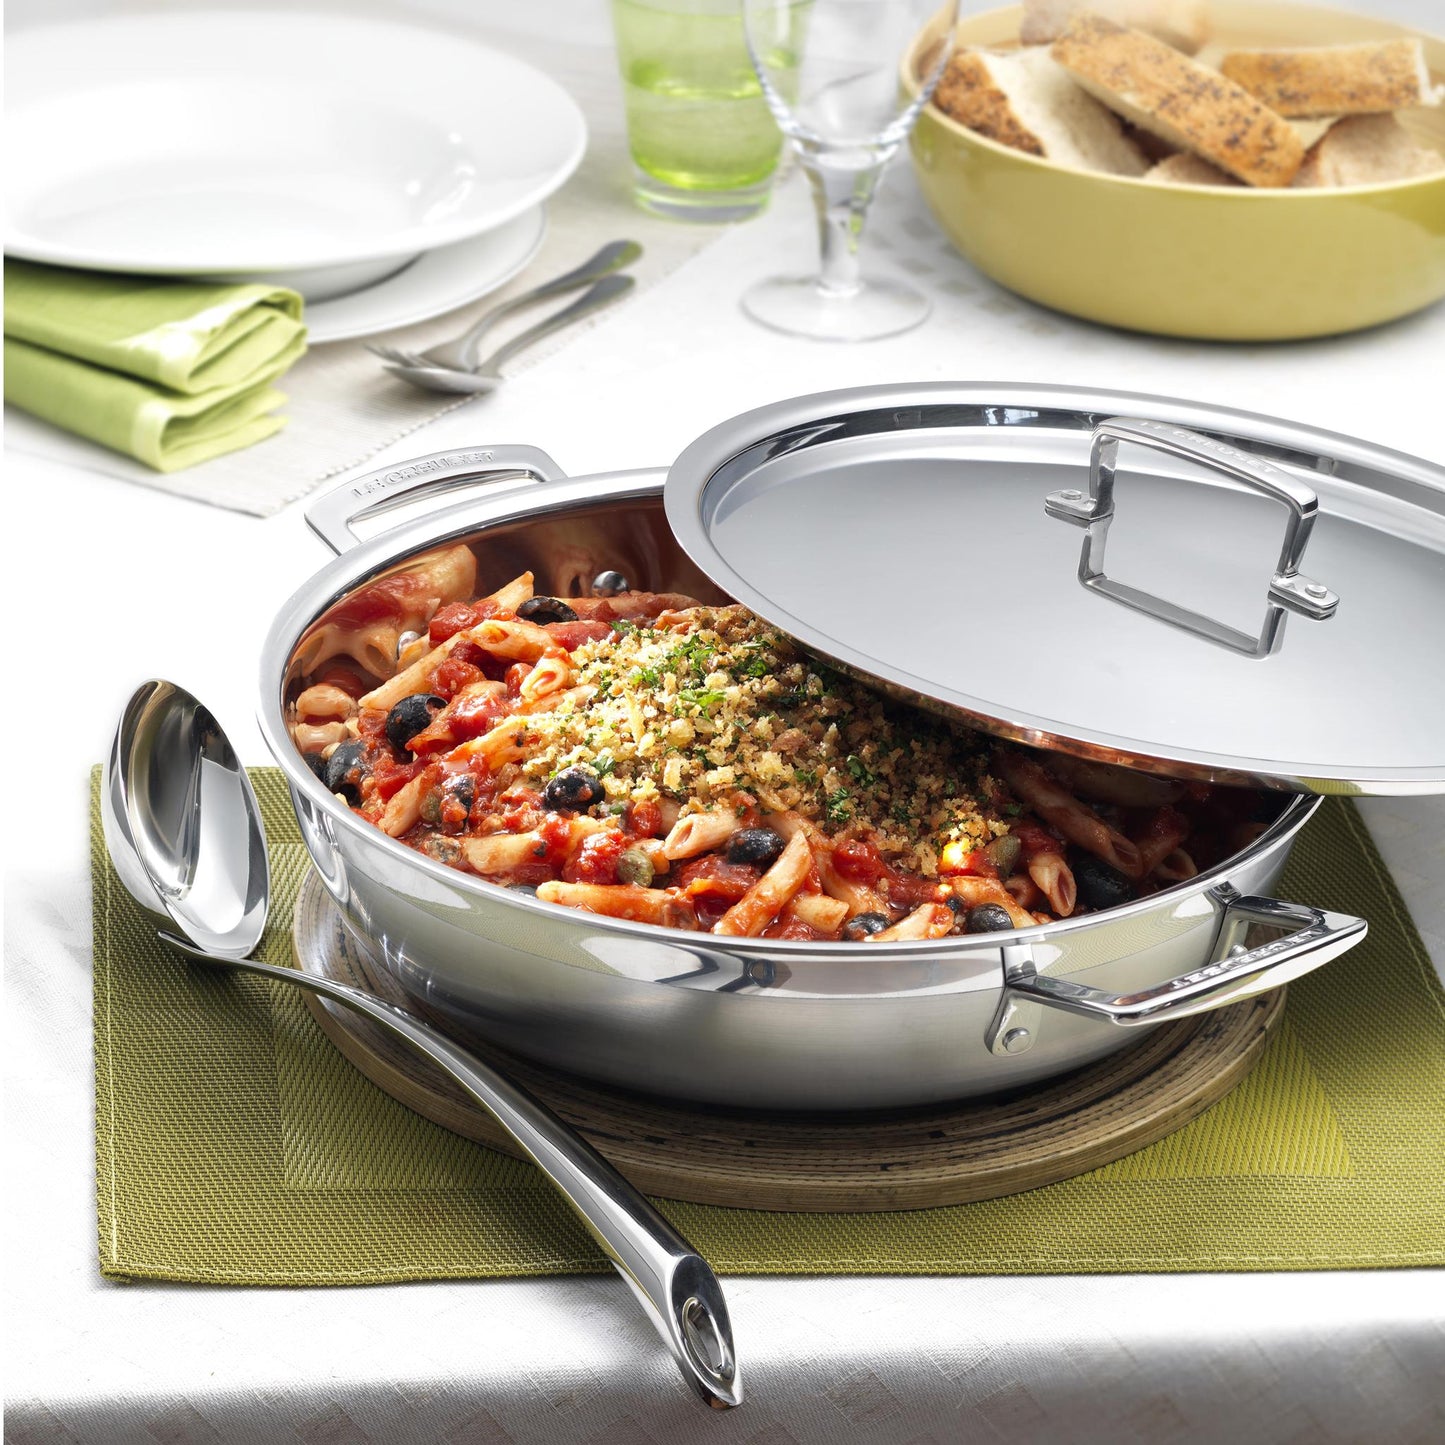 The casserole pan displayed on a dining table filled with a pasta dish